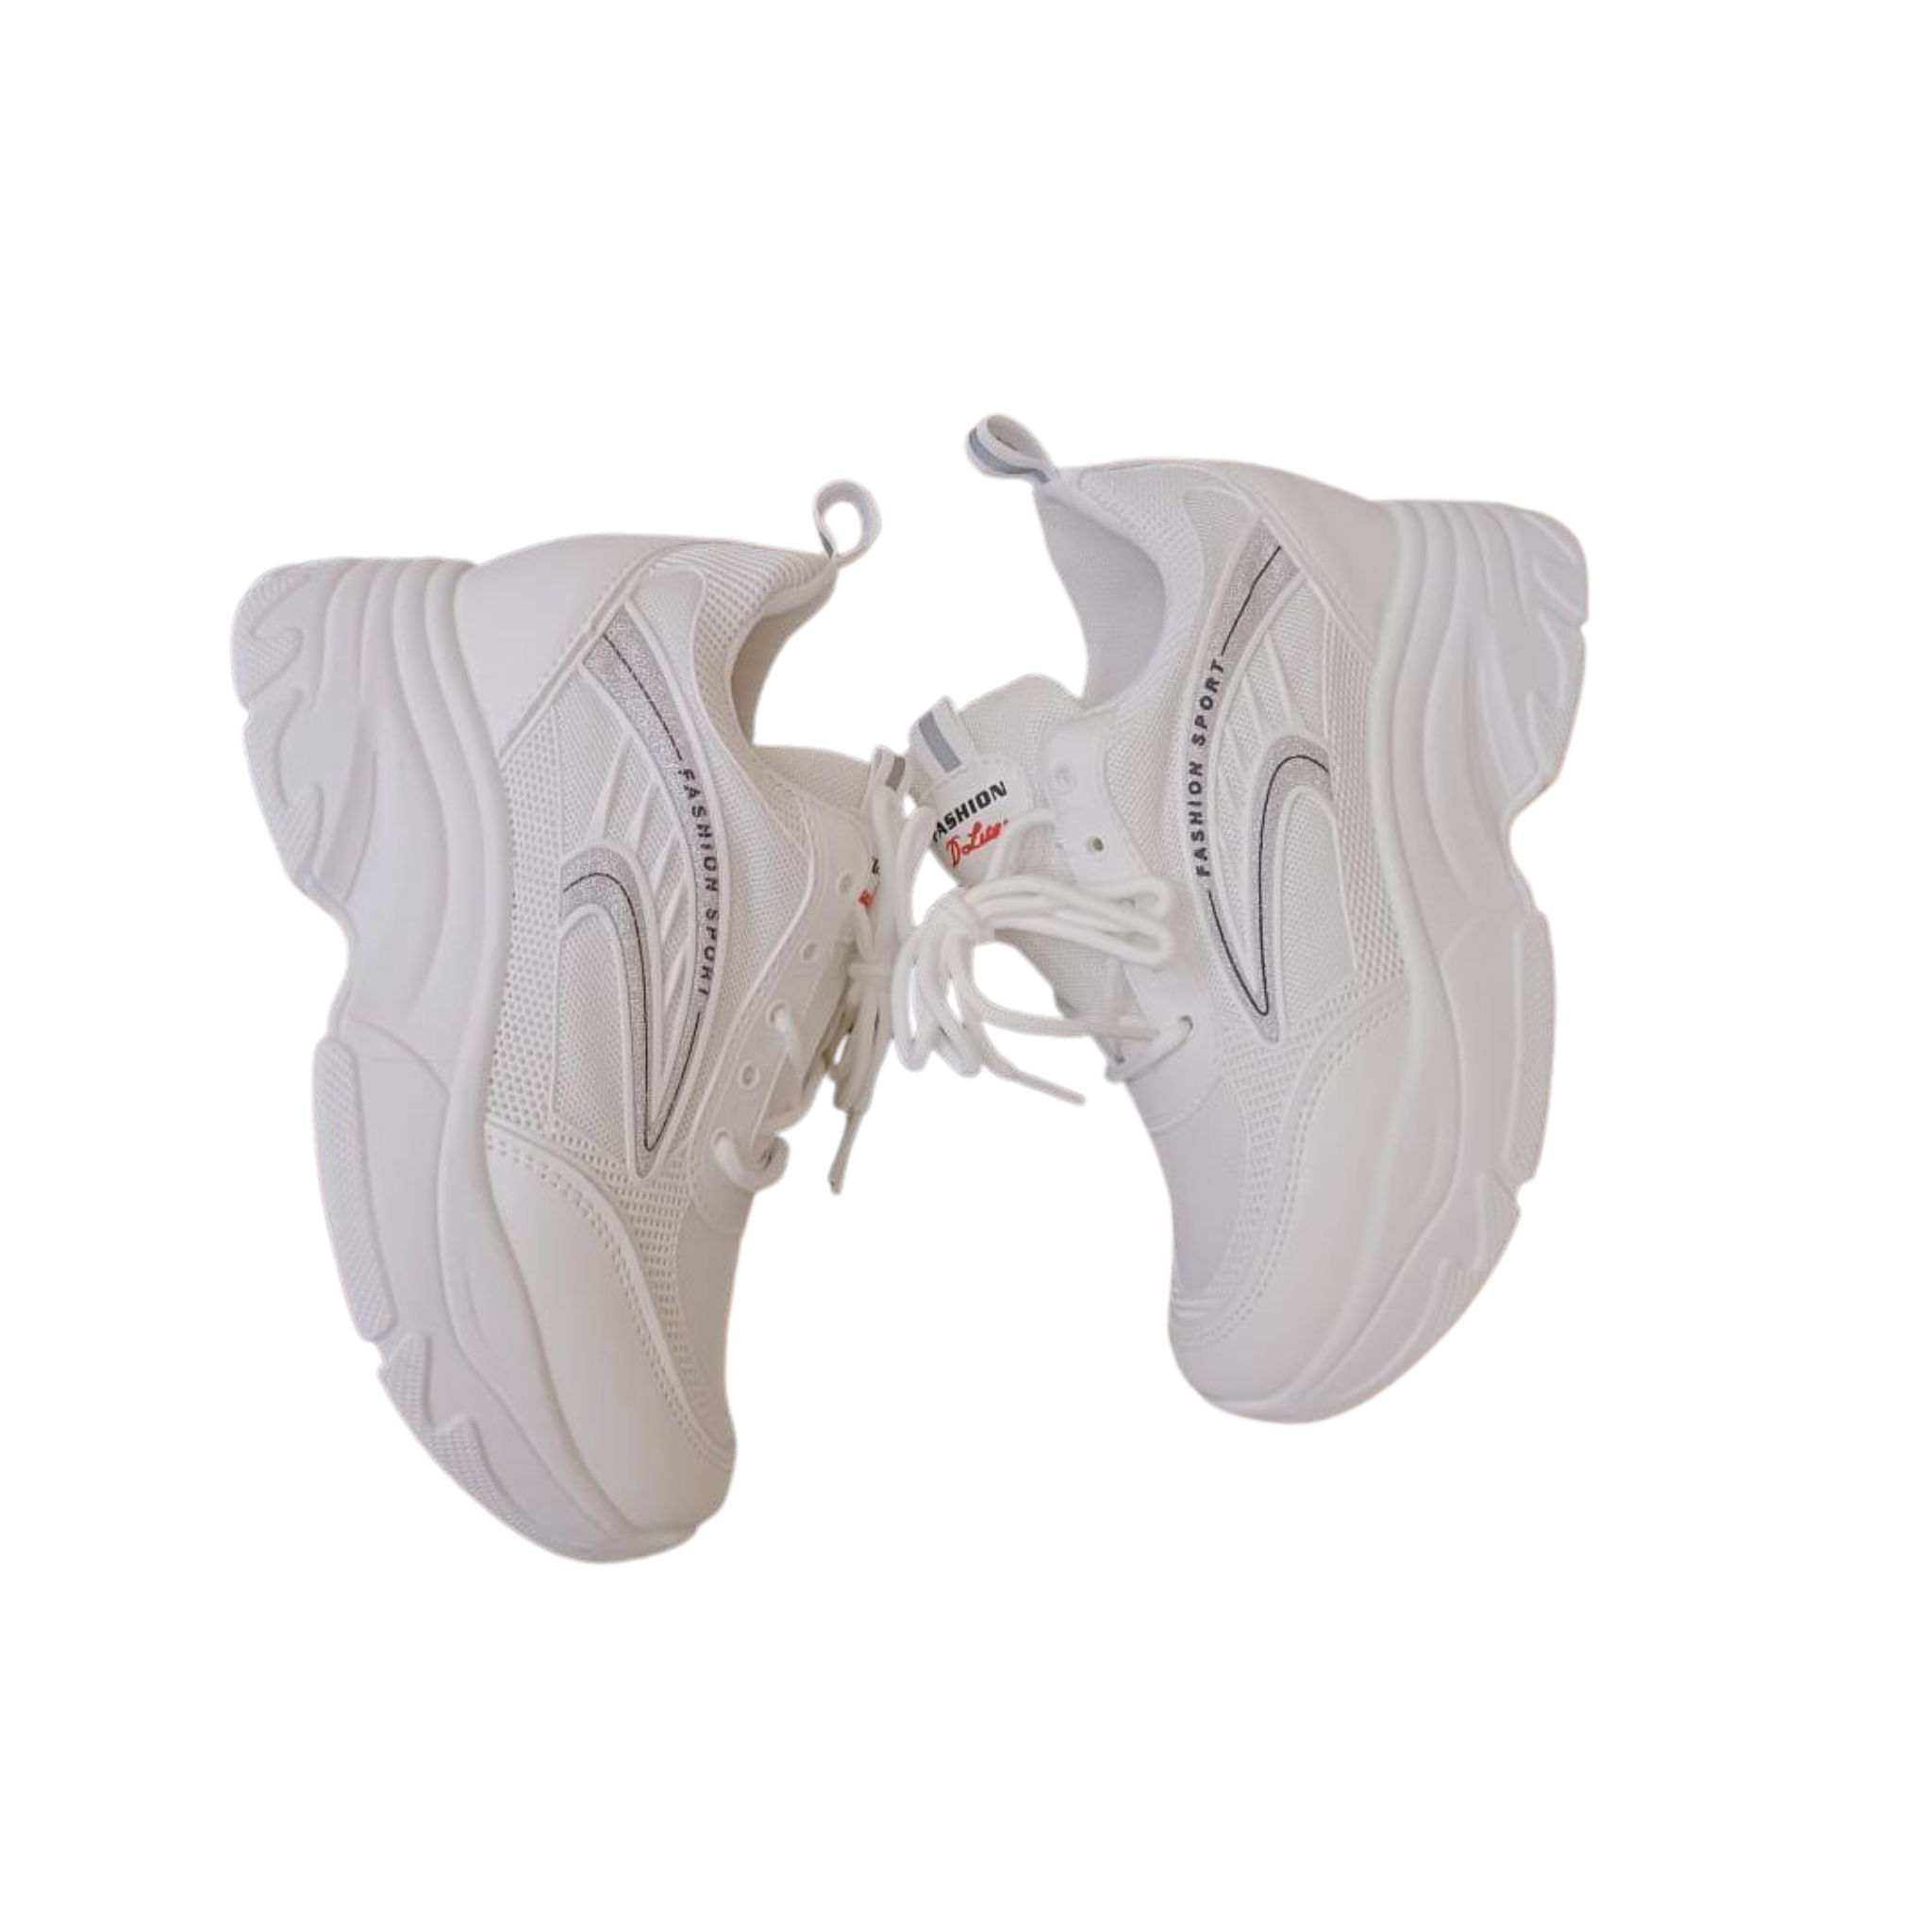 Sneakers, High Heel Premium Quality, Casual & Sports Shoes, for Women